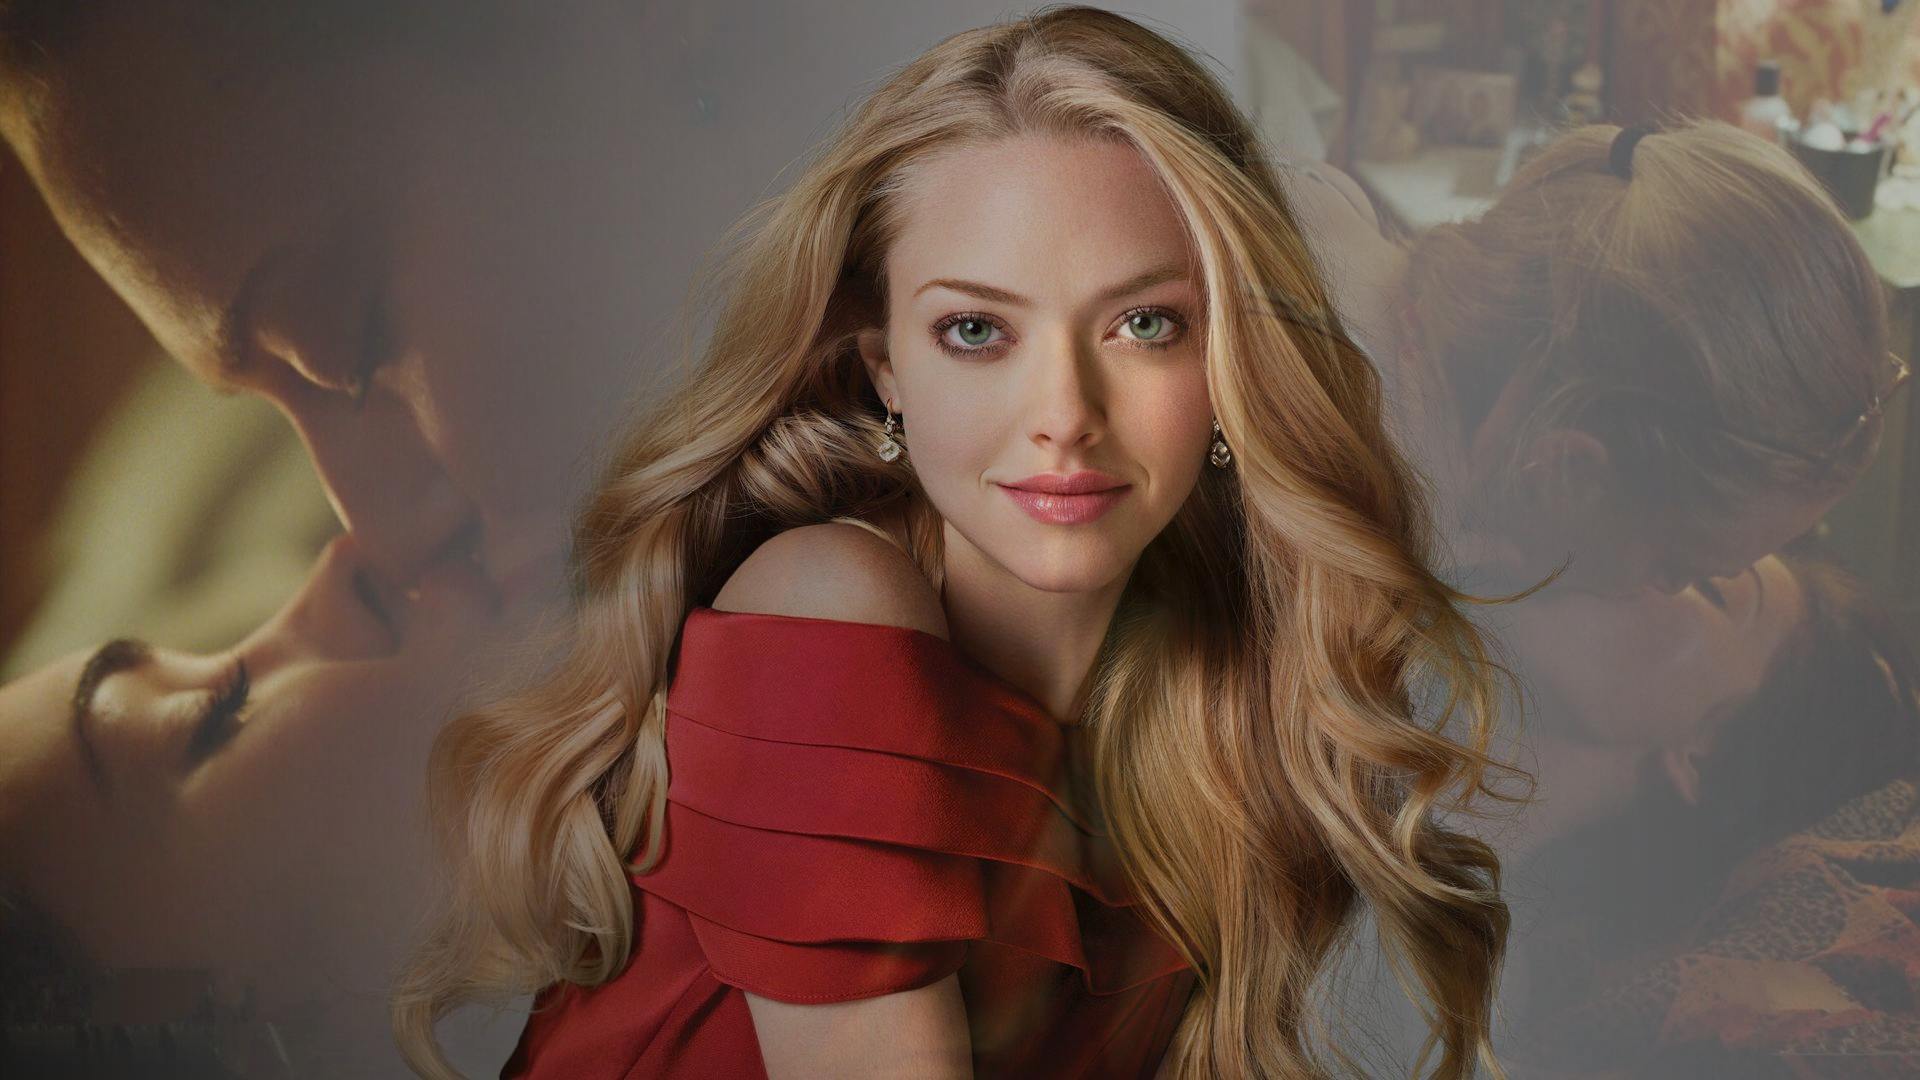 Amanda Seyfried Wallpaper Image Photos Pictures Background